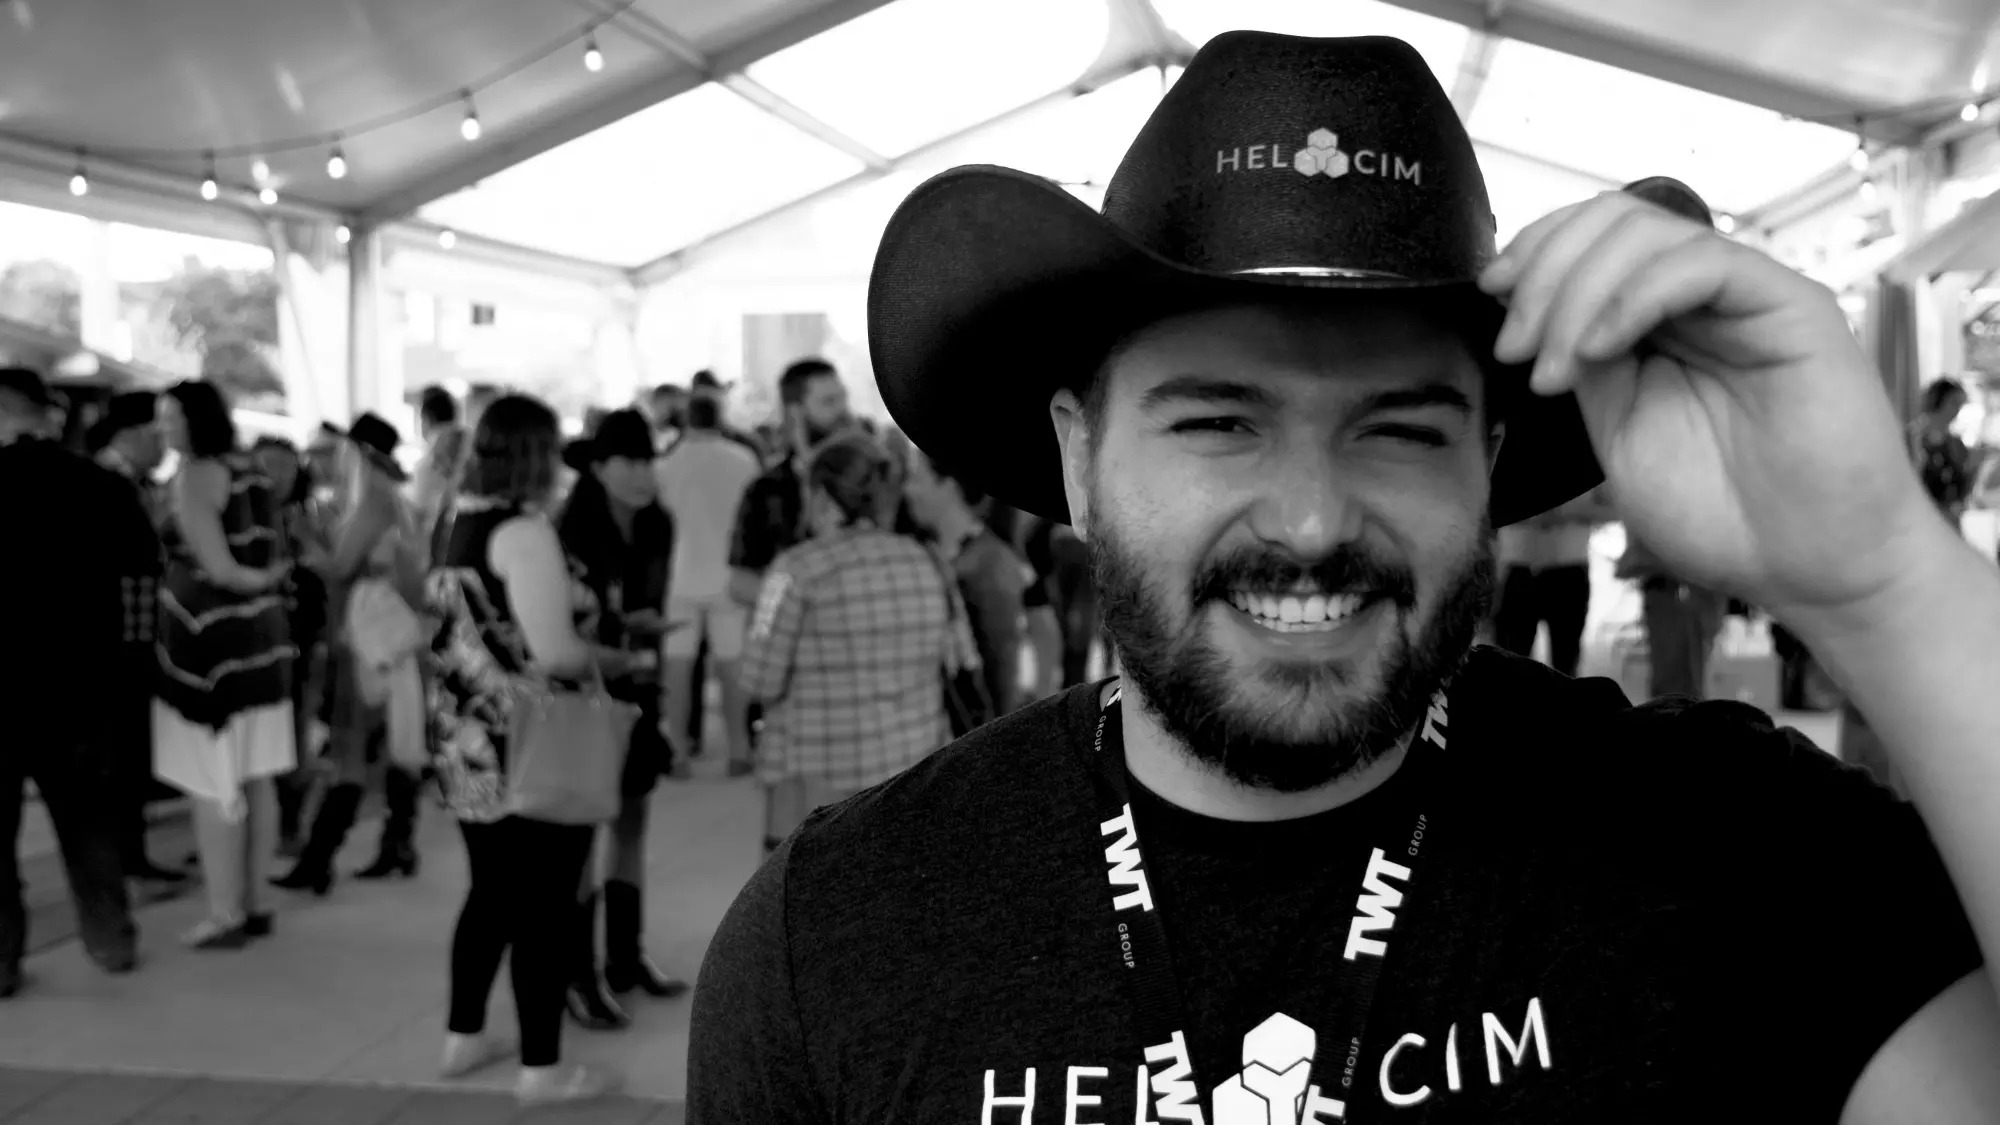 Nic at a Calgary Stampede Party